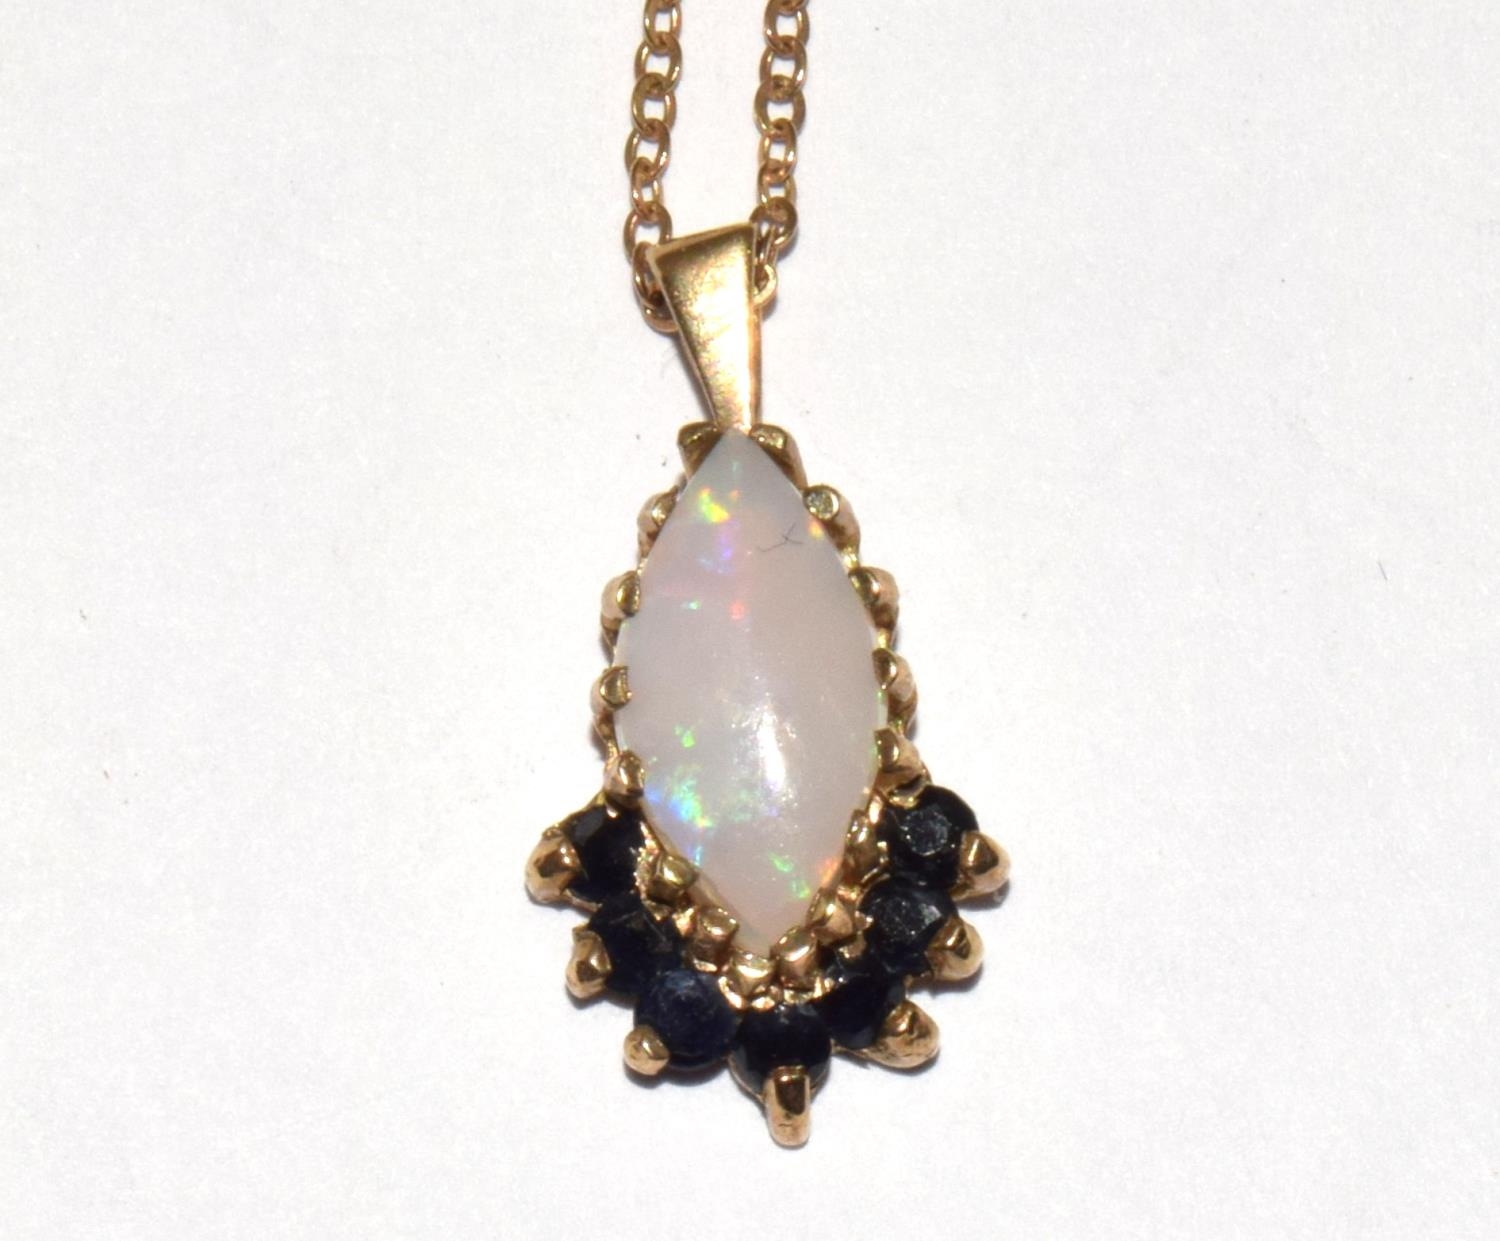 9ct gold ladies Opal and Sapphire pendant necklace with a chain 40cm - Image 2 of 6